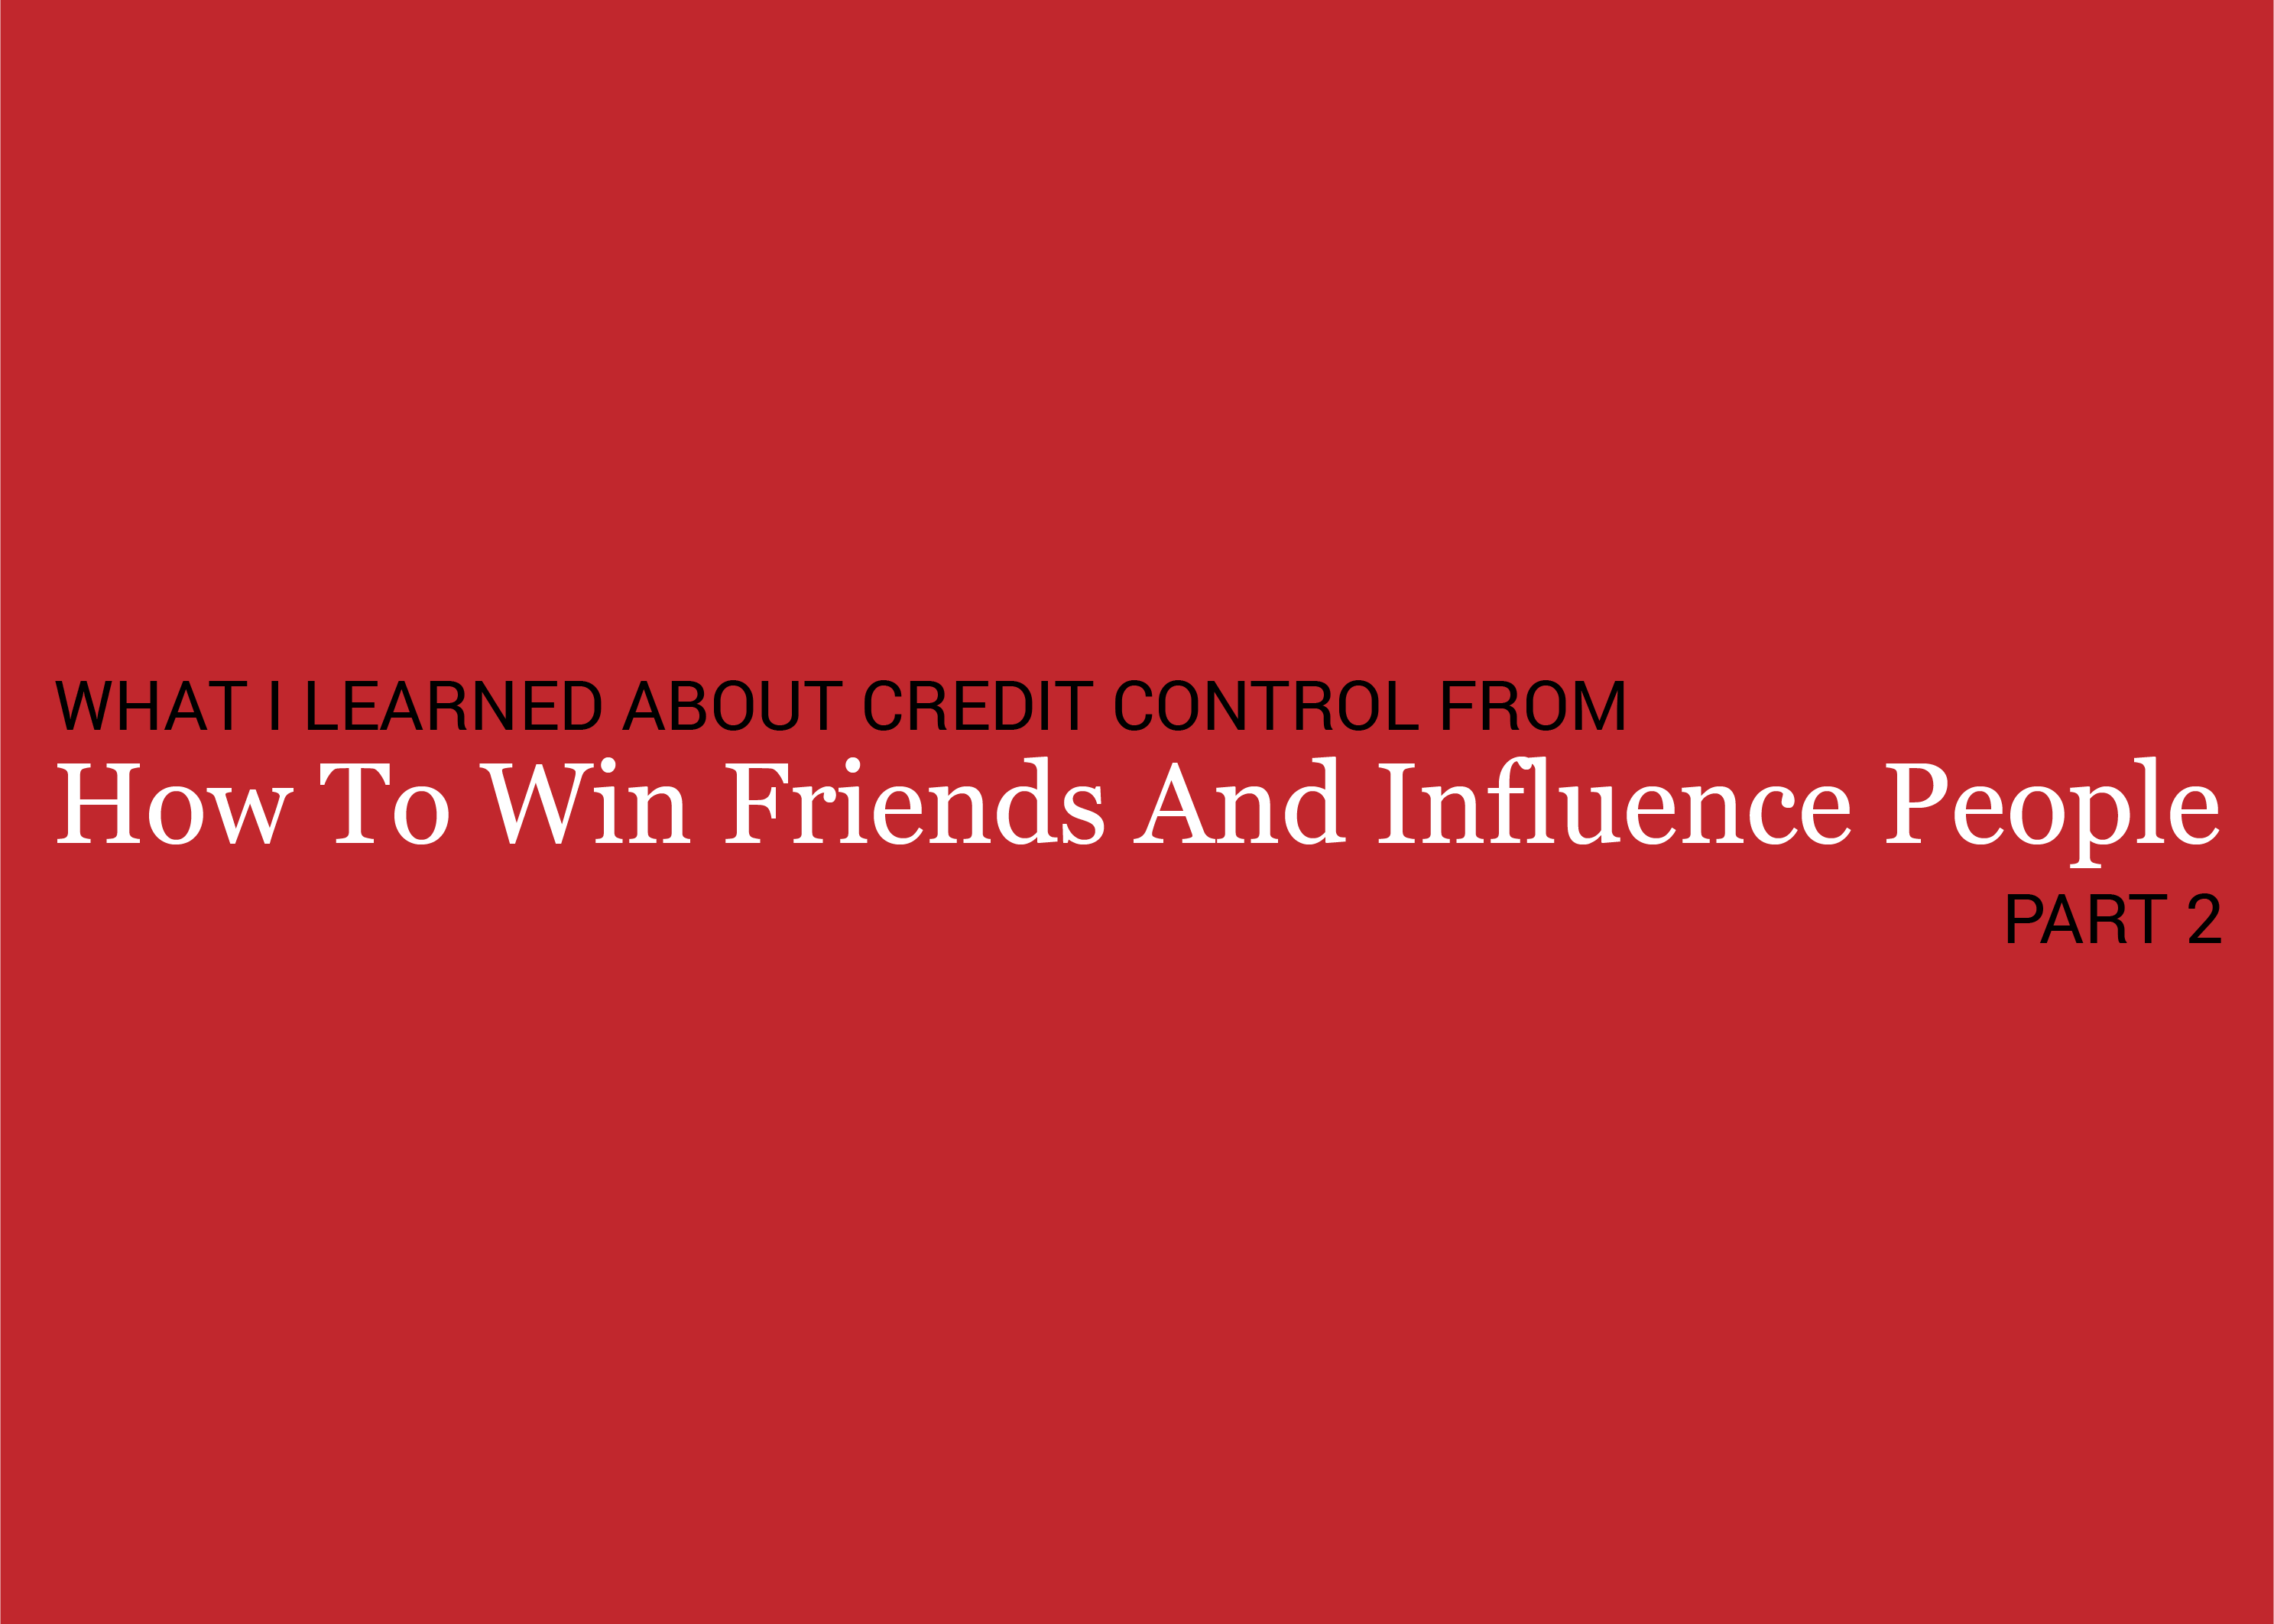 What I Learned About Credit Control From: How To Win Friends & Influence People (Part 2)